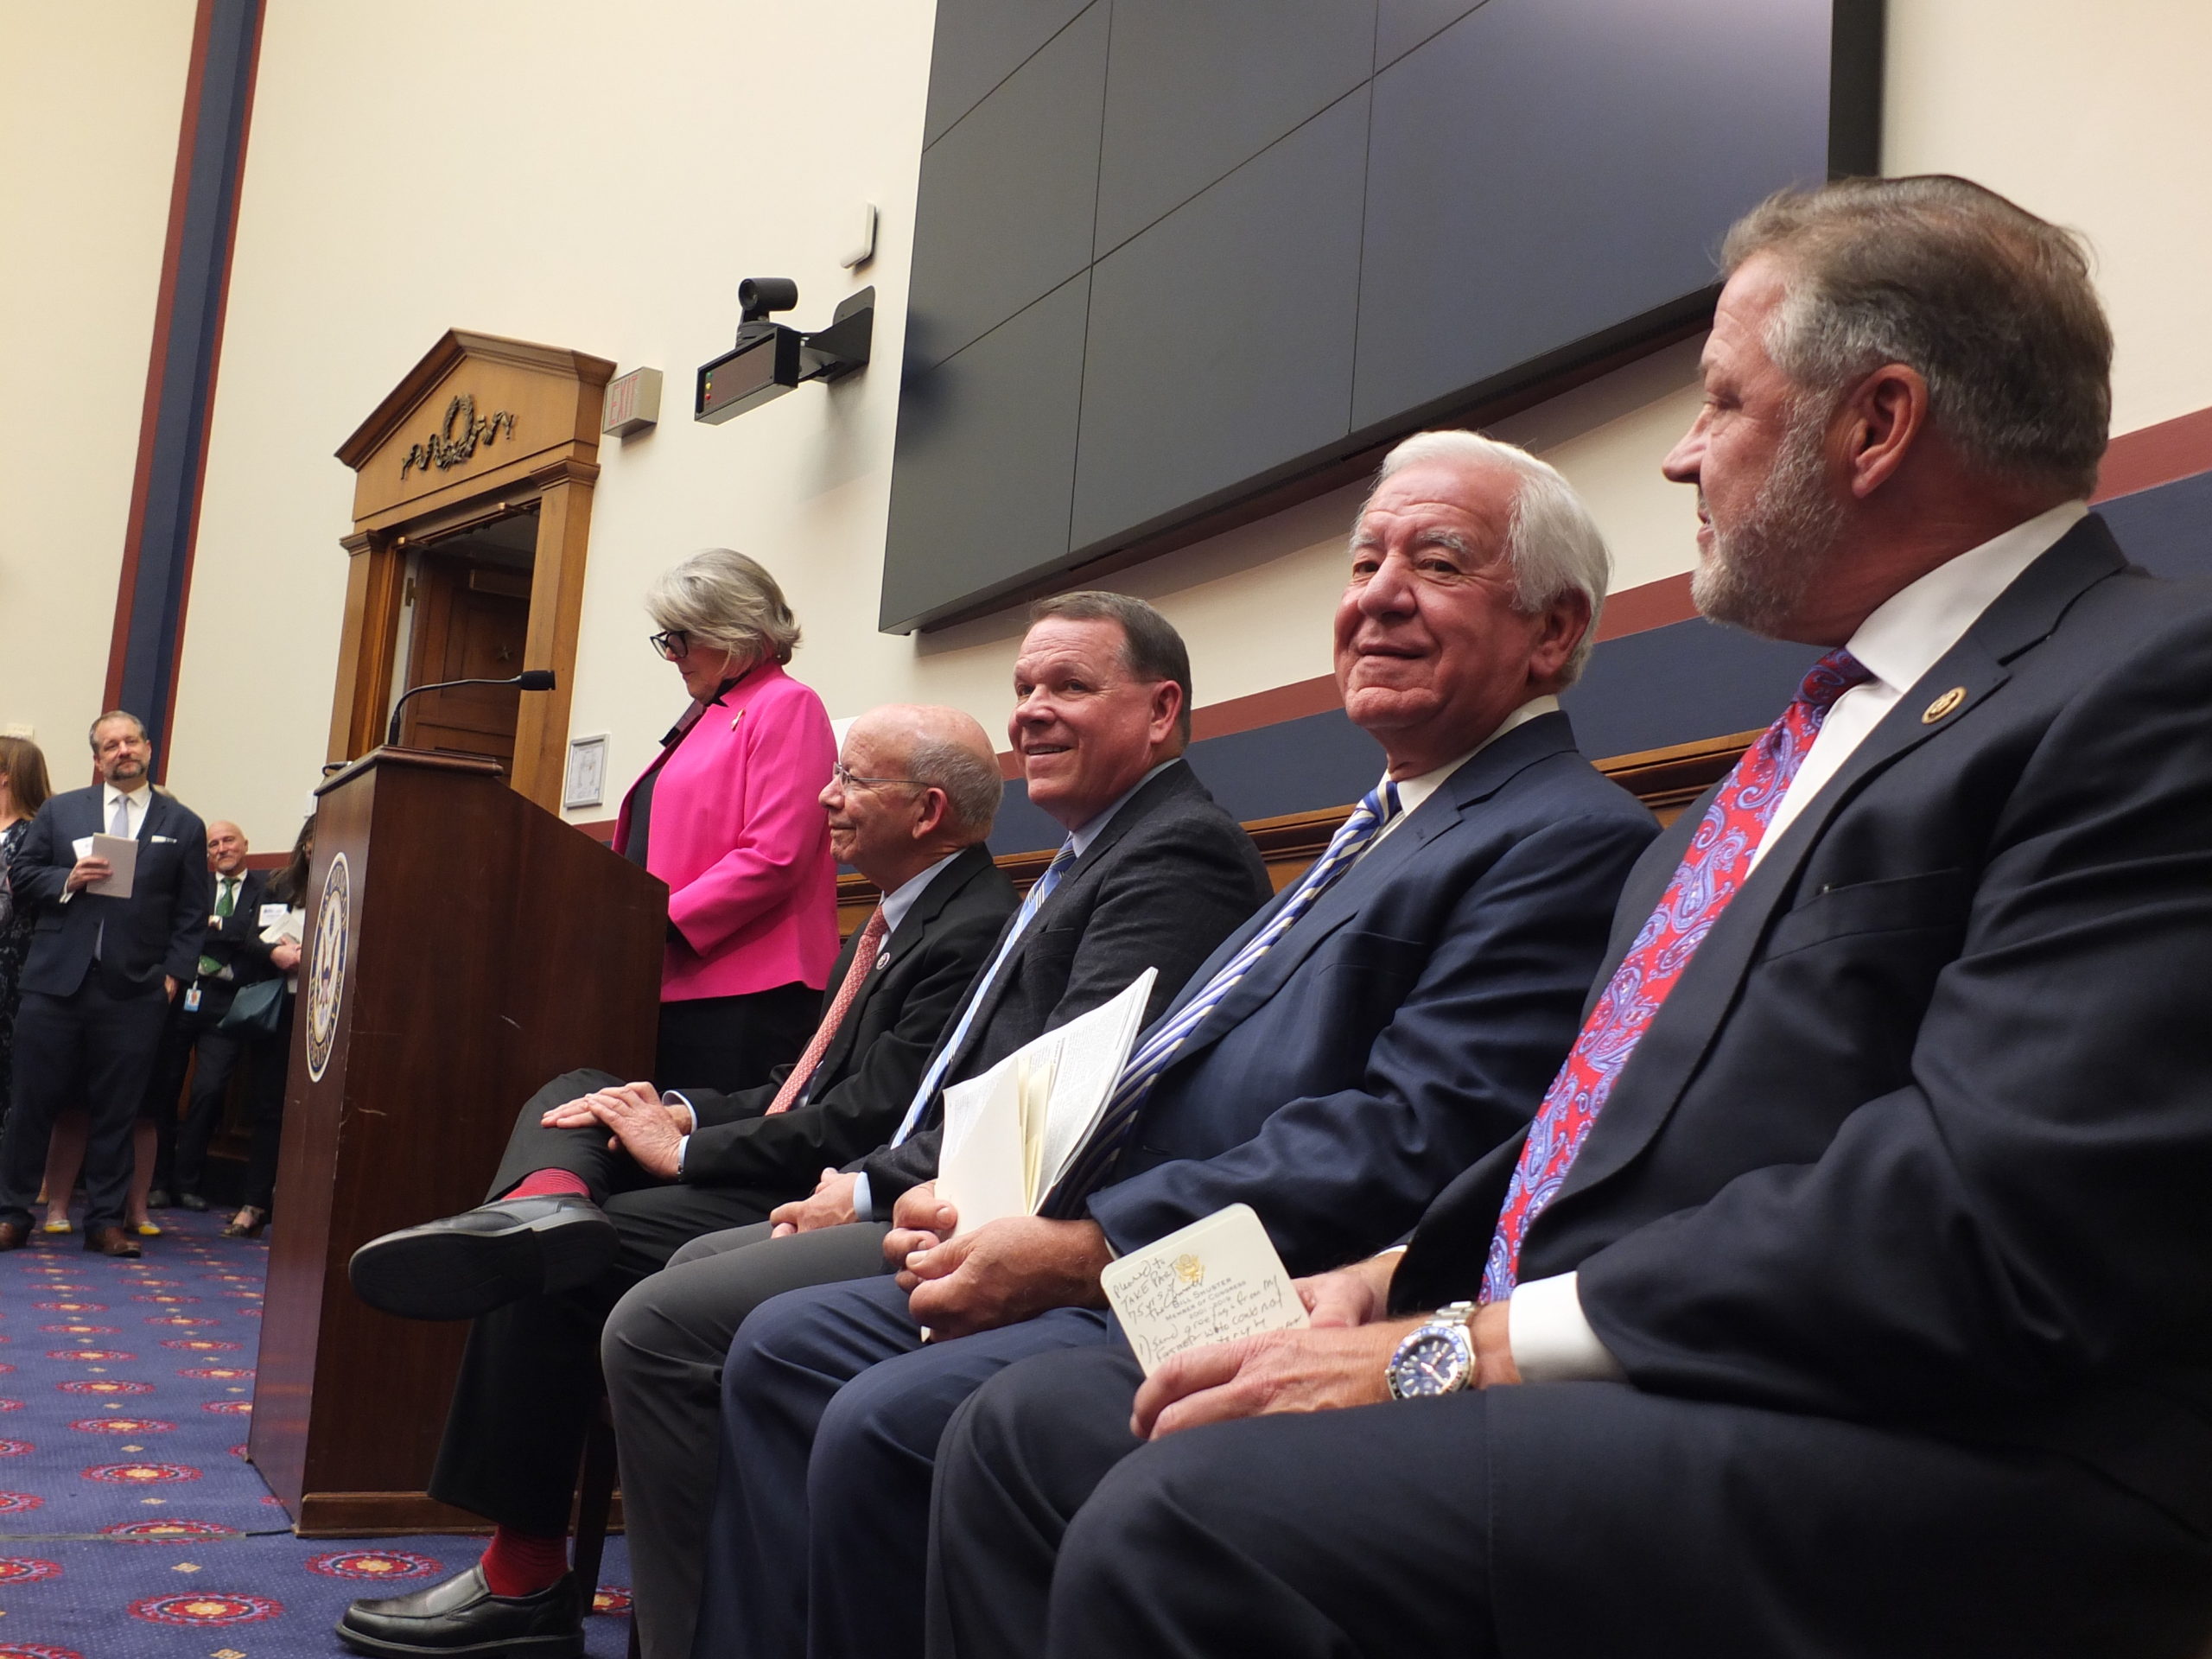 Chairman DeFazio and Ranking Member Graves, and former Representatives Shuster and Rahall reflected on their time with the House T&I Committee.
Photos (c) Bruce Guthrie